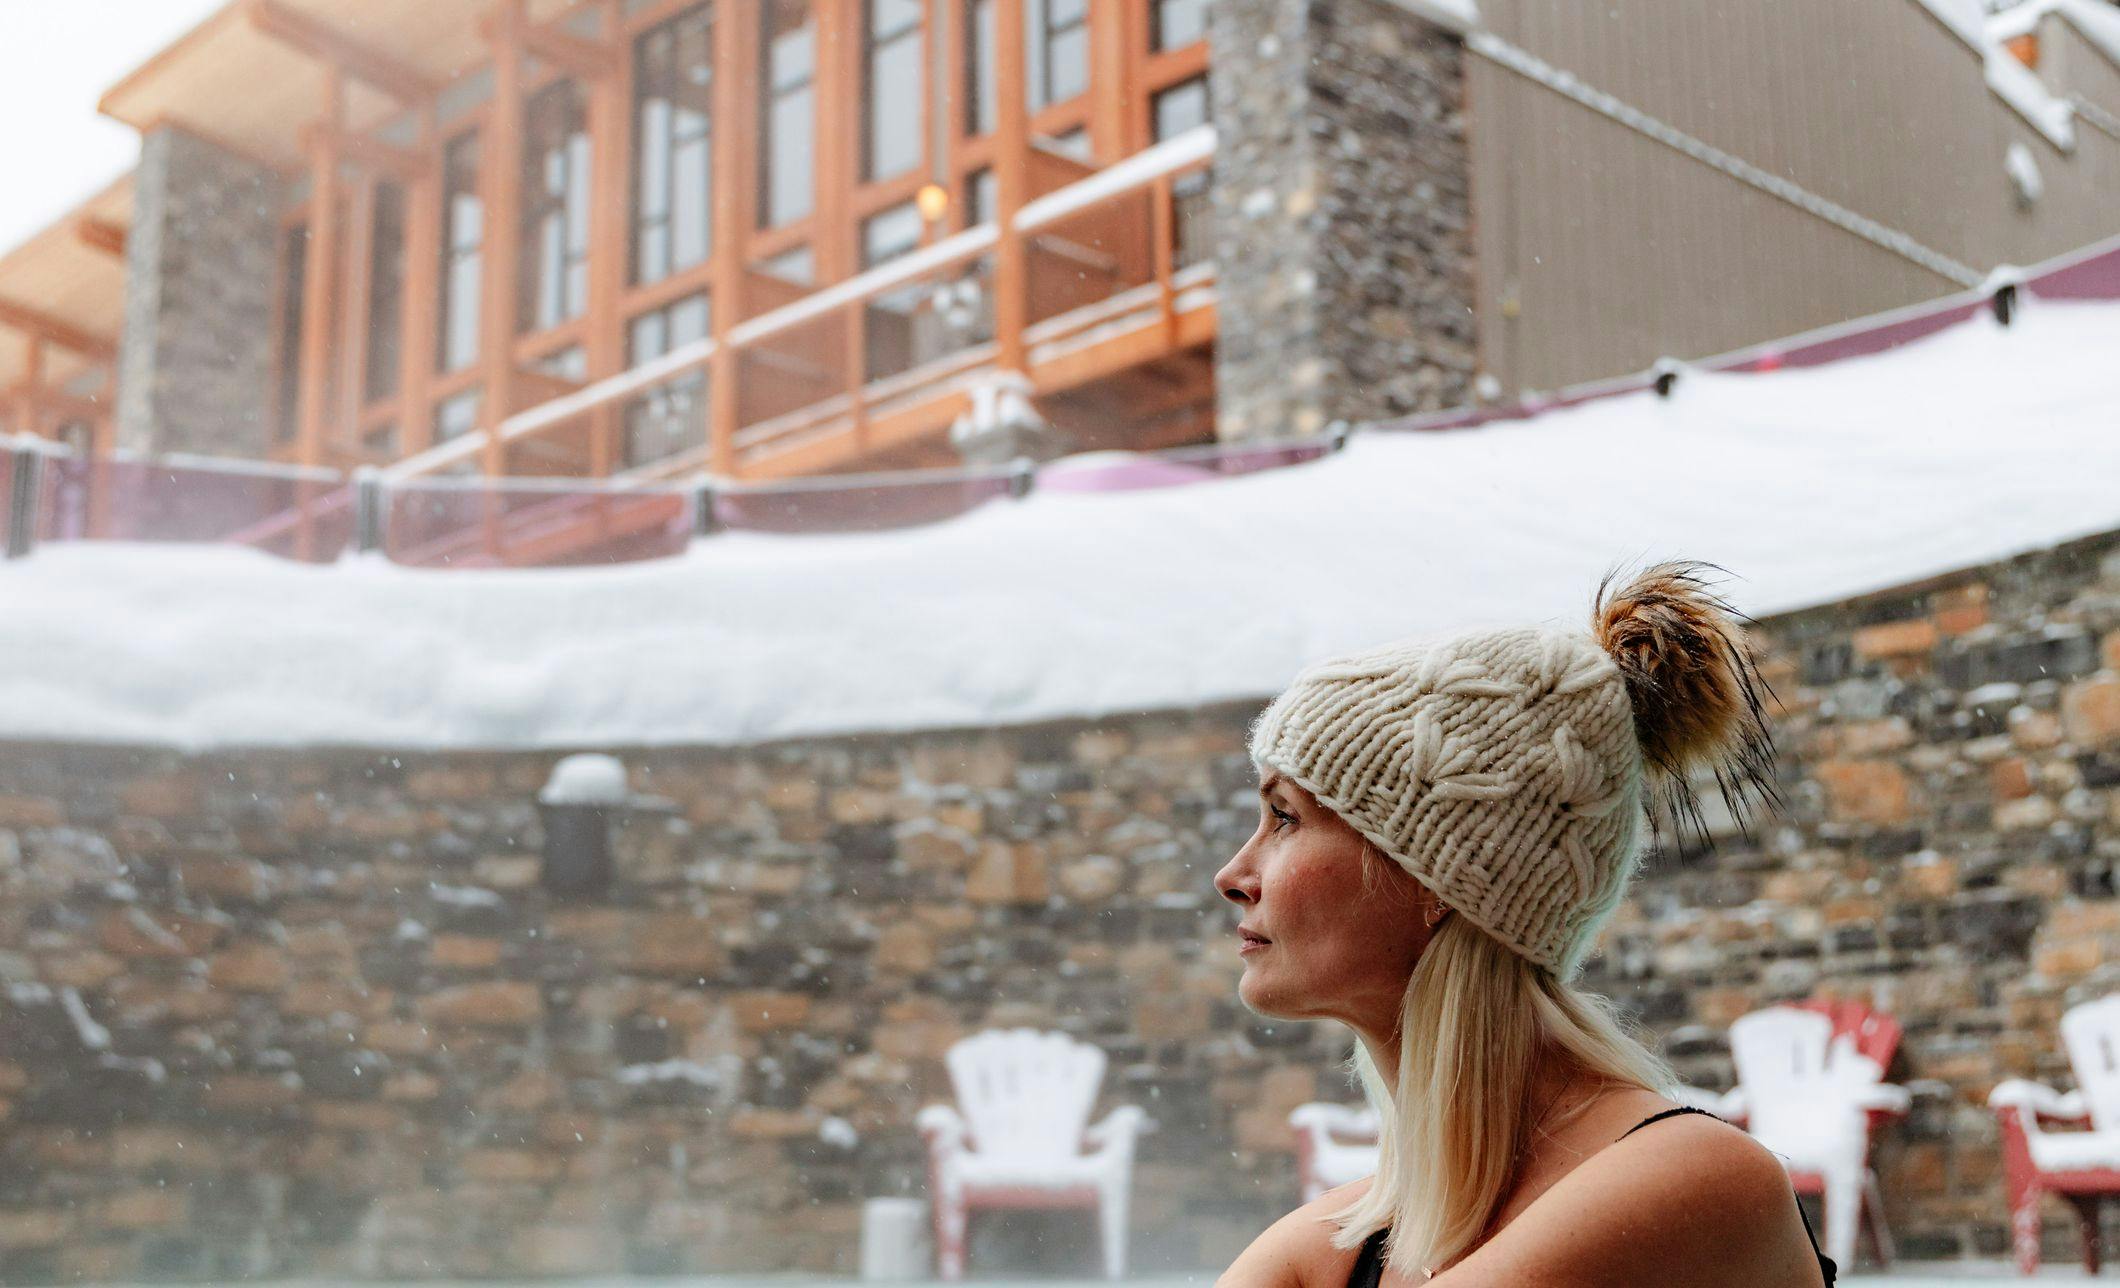 A woman in a toque sitting in an outdoor hot tub in the winter with a ski lodge behind her